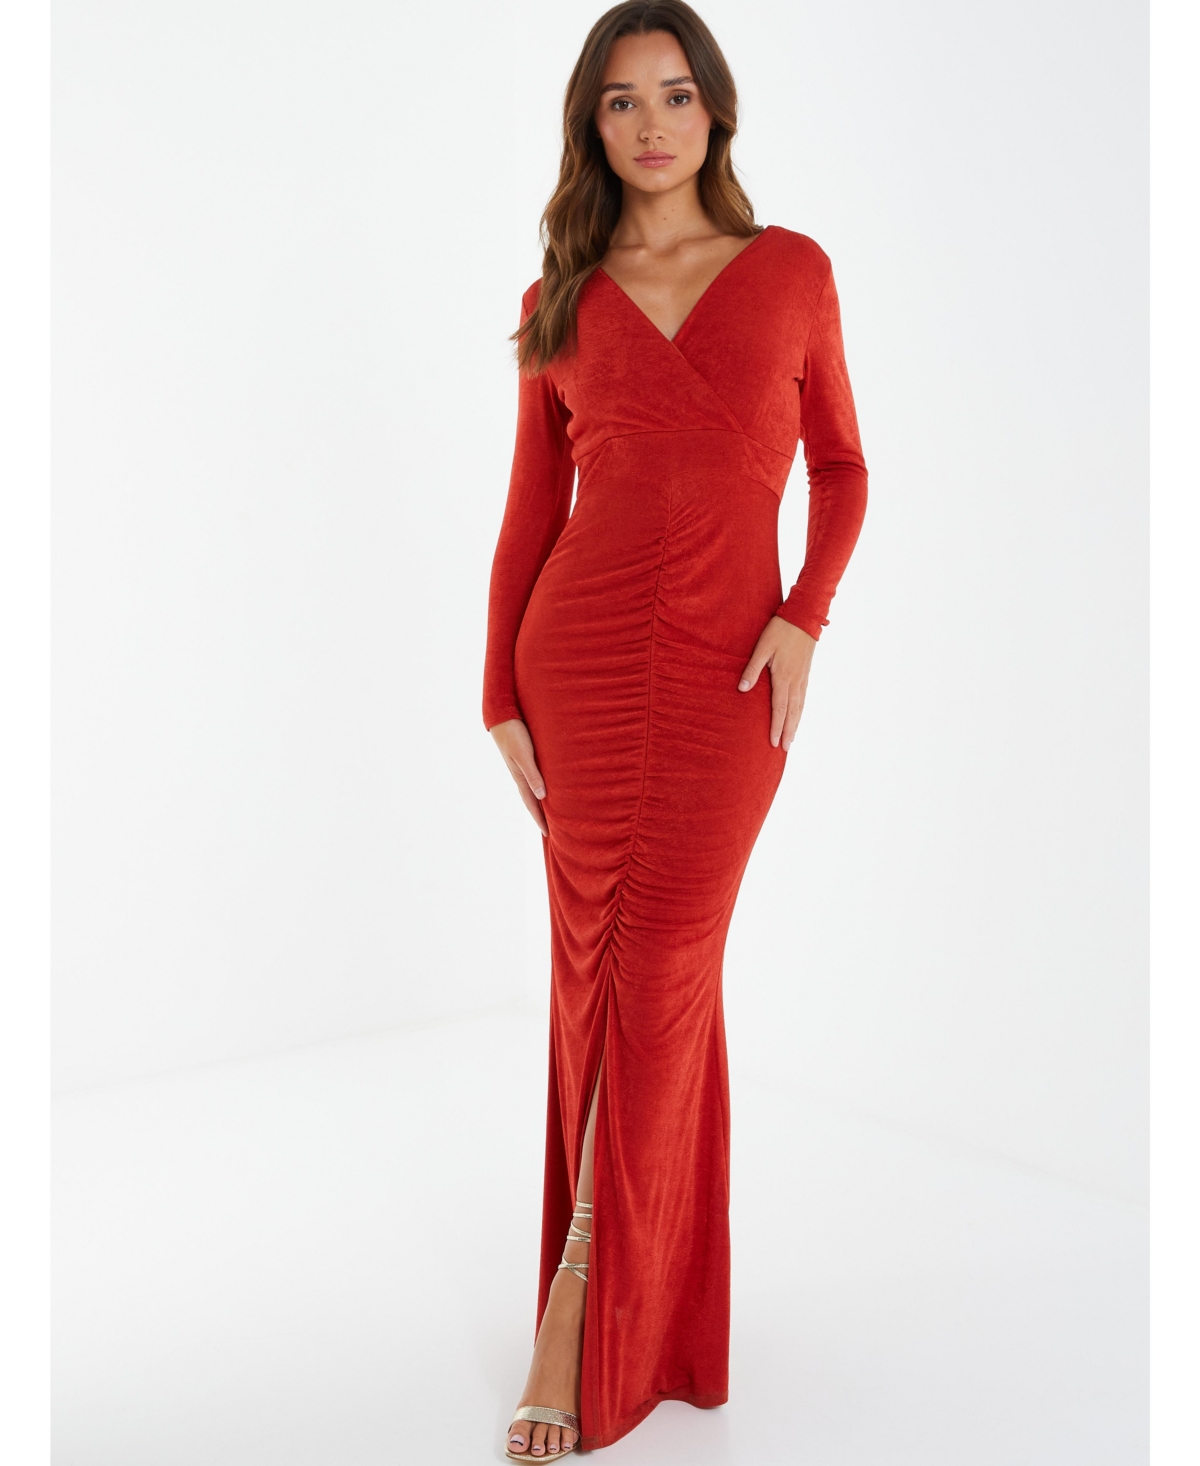 Women's Maxi Dress With Long Sleeves And Ruching Detail - Orange